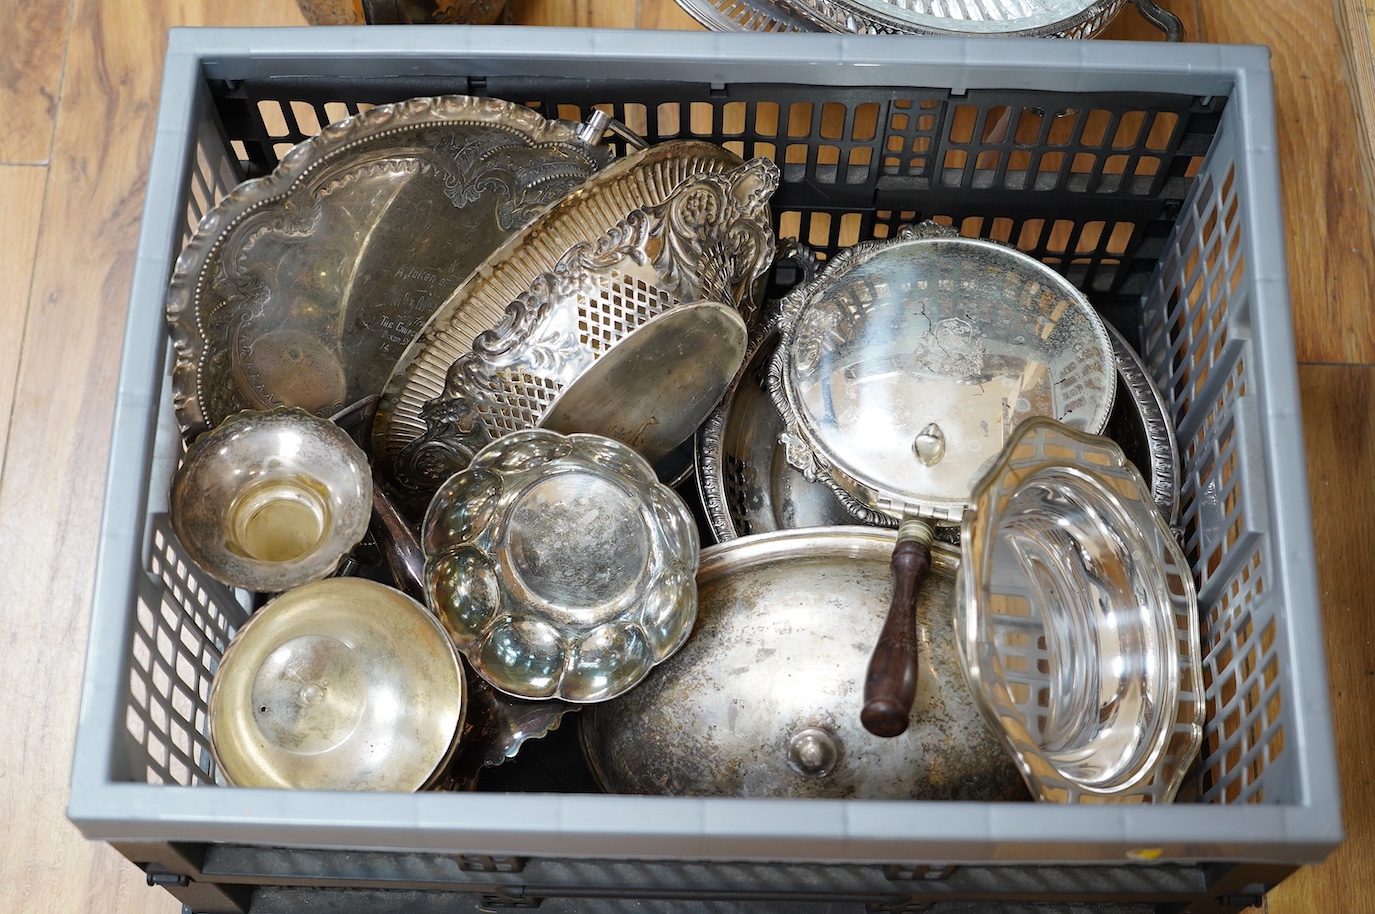 A quantity of plated ware, including a tazza, an hors d’oeuvres dish, bowls, dishes, a coffee pot, etc. Condition - fair to good